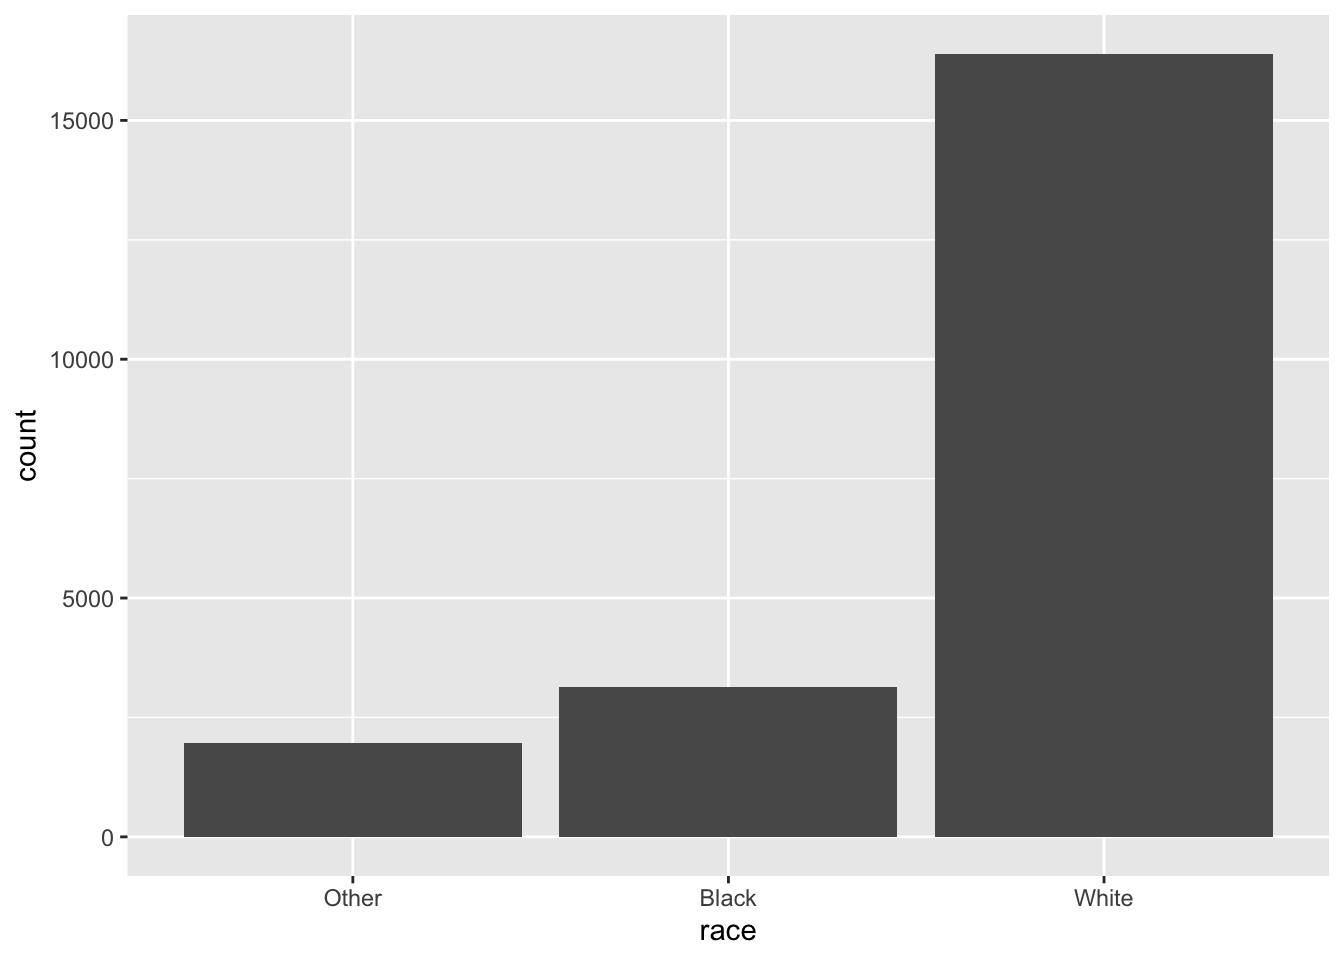 A bar chart showing the distribution of race. There are ~2000 records with race 